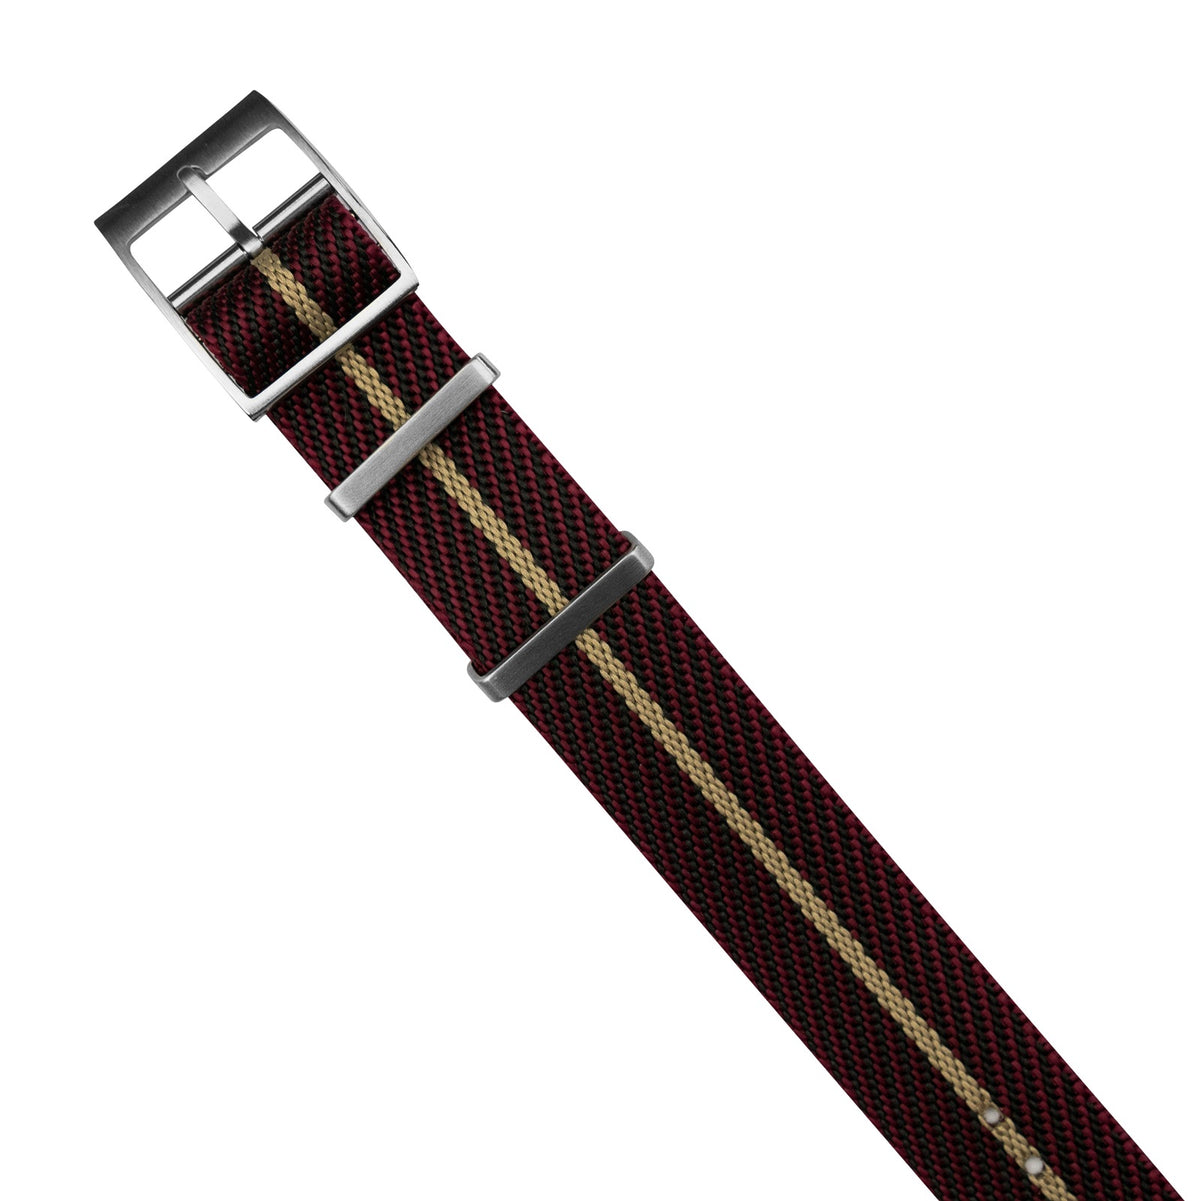 Lux Single Pass Strap in Burgundy Sand with Silver Buckle (20mm) - Nomad Watch Works MY